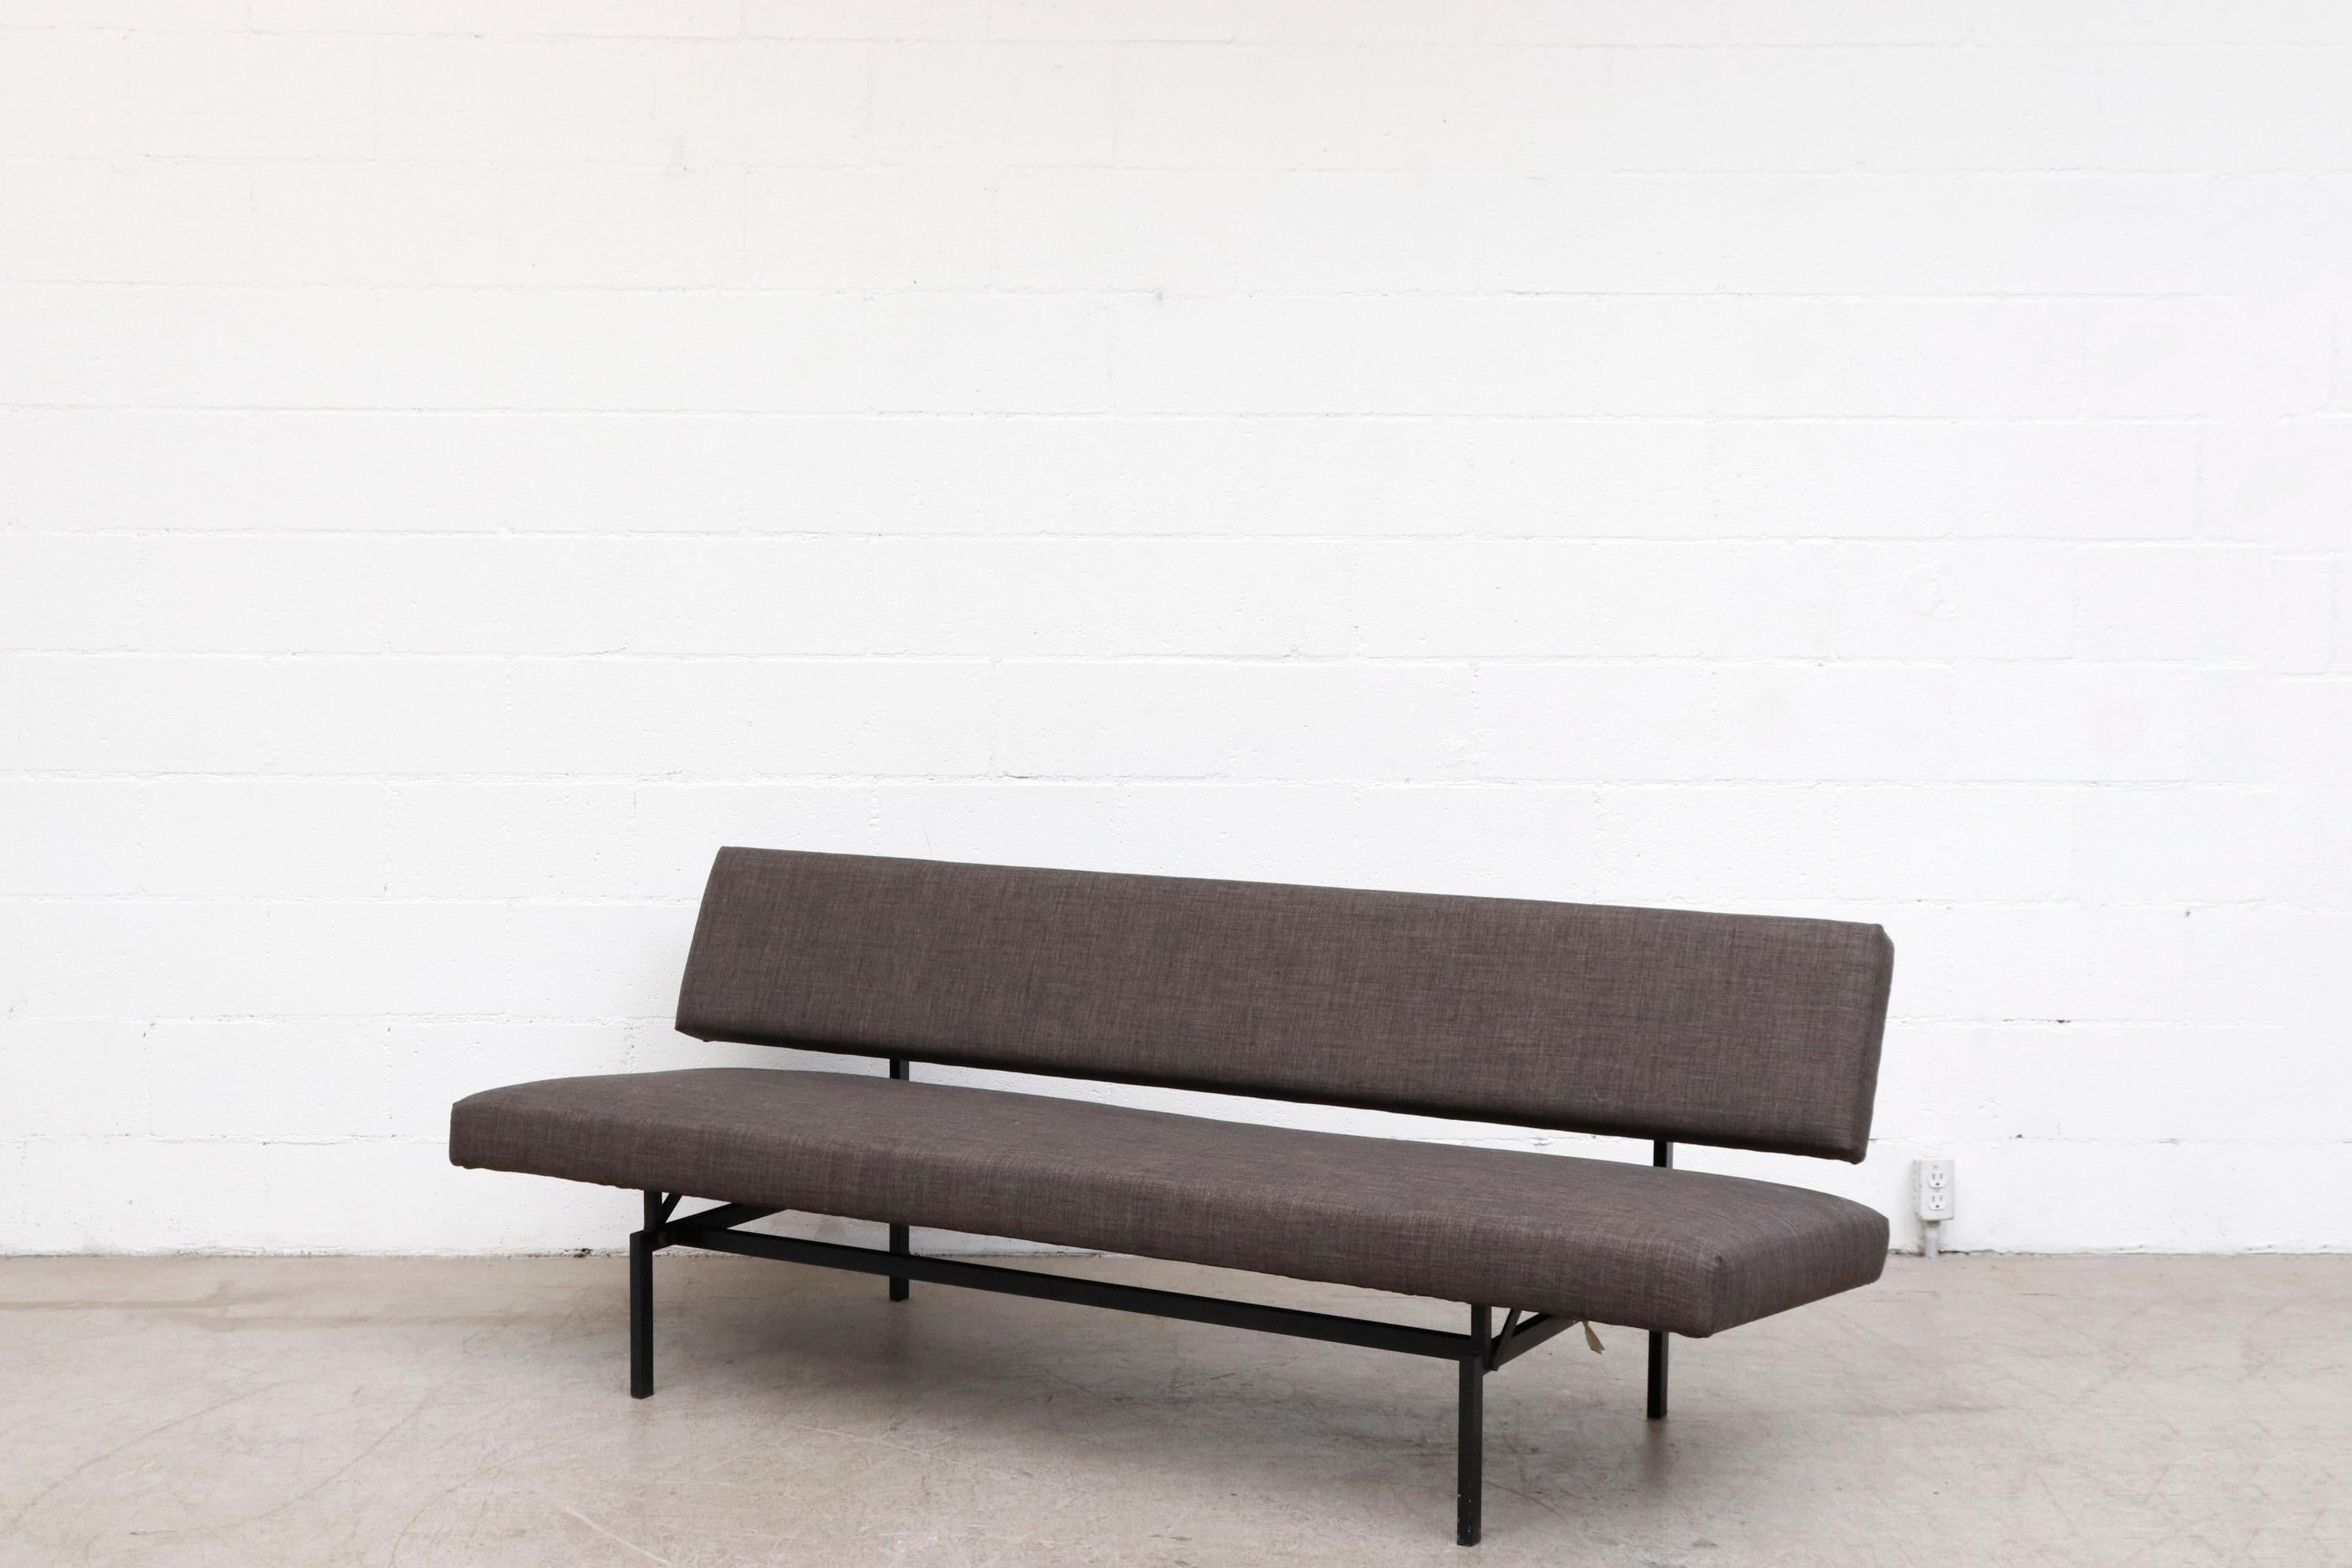 Midcentury Martin Visser sleeper sofa with charcoal grey upholstery and black enameled metal frame. In overall good condition with pull-out seat for sleeper. Other similar style sofas also available (LU922419801852). Shot with Willy van der Meeren